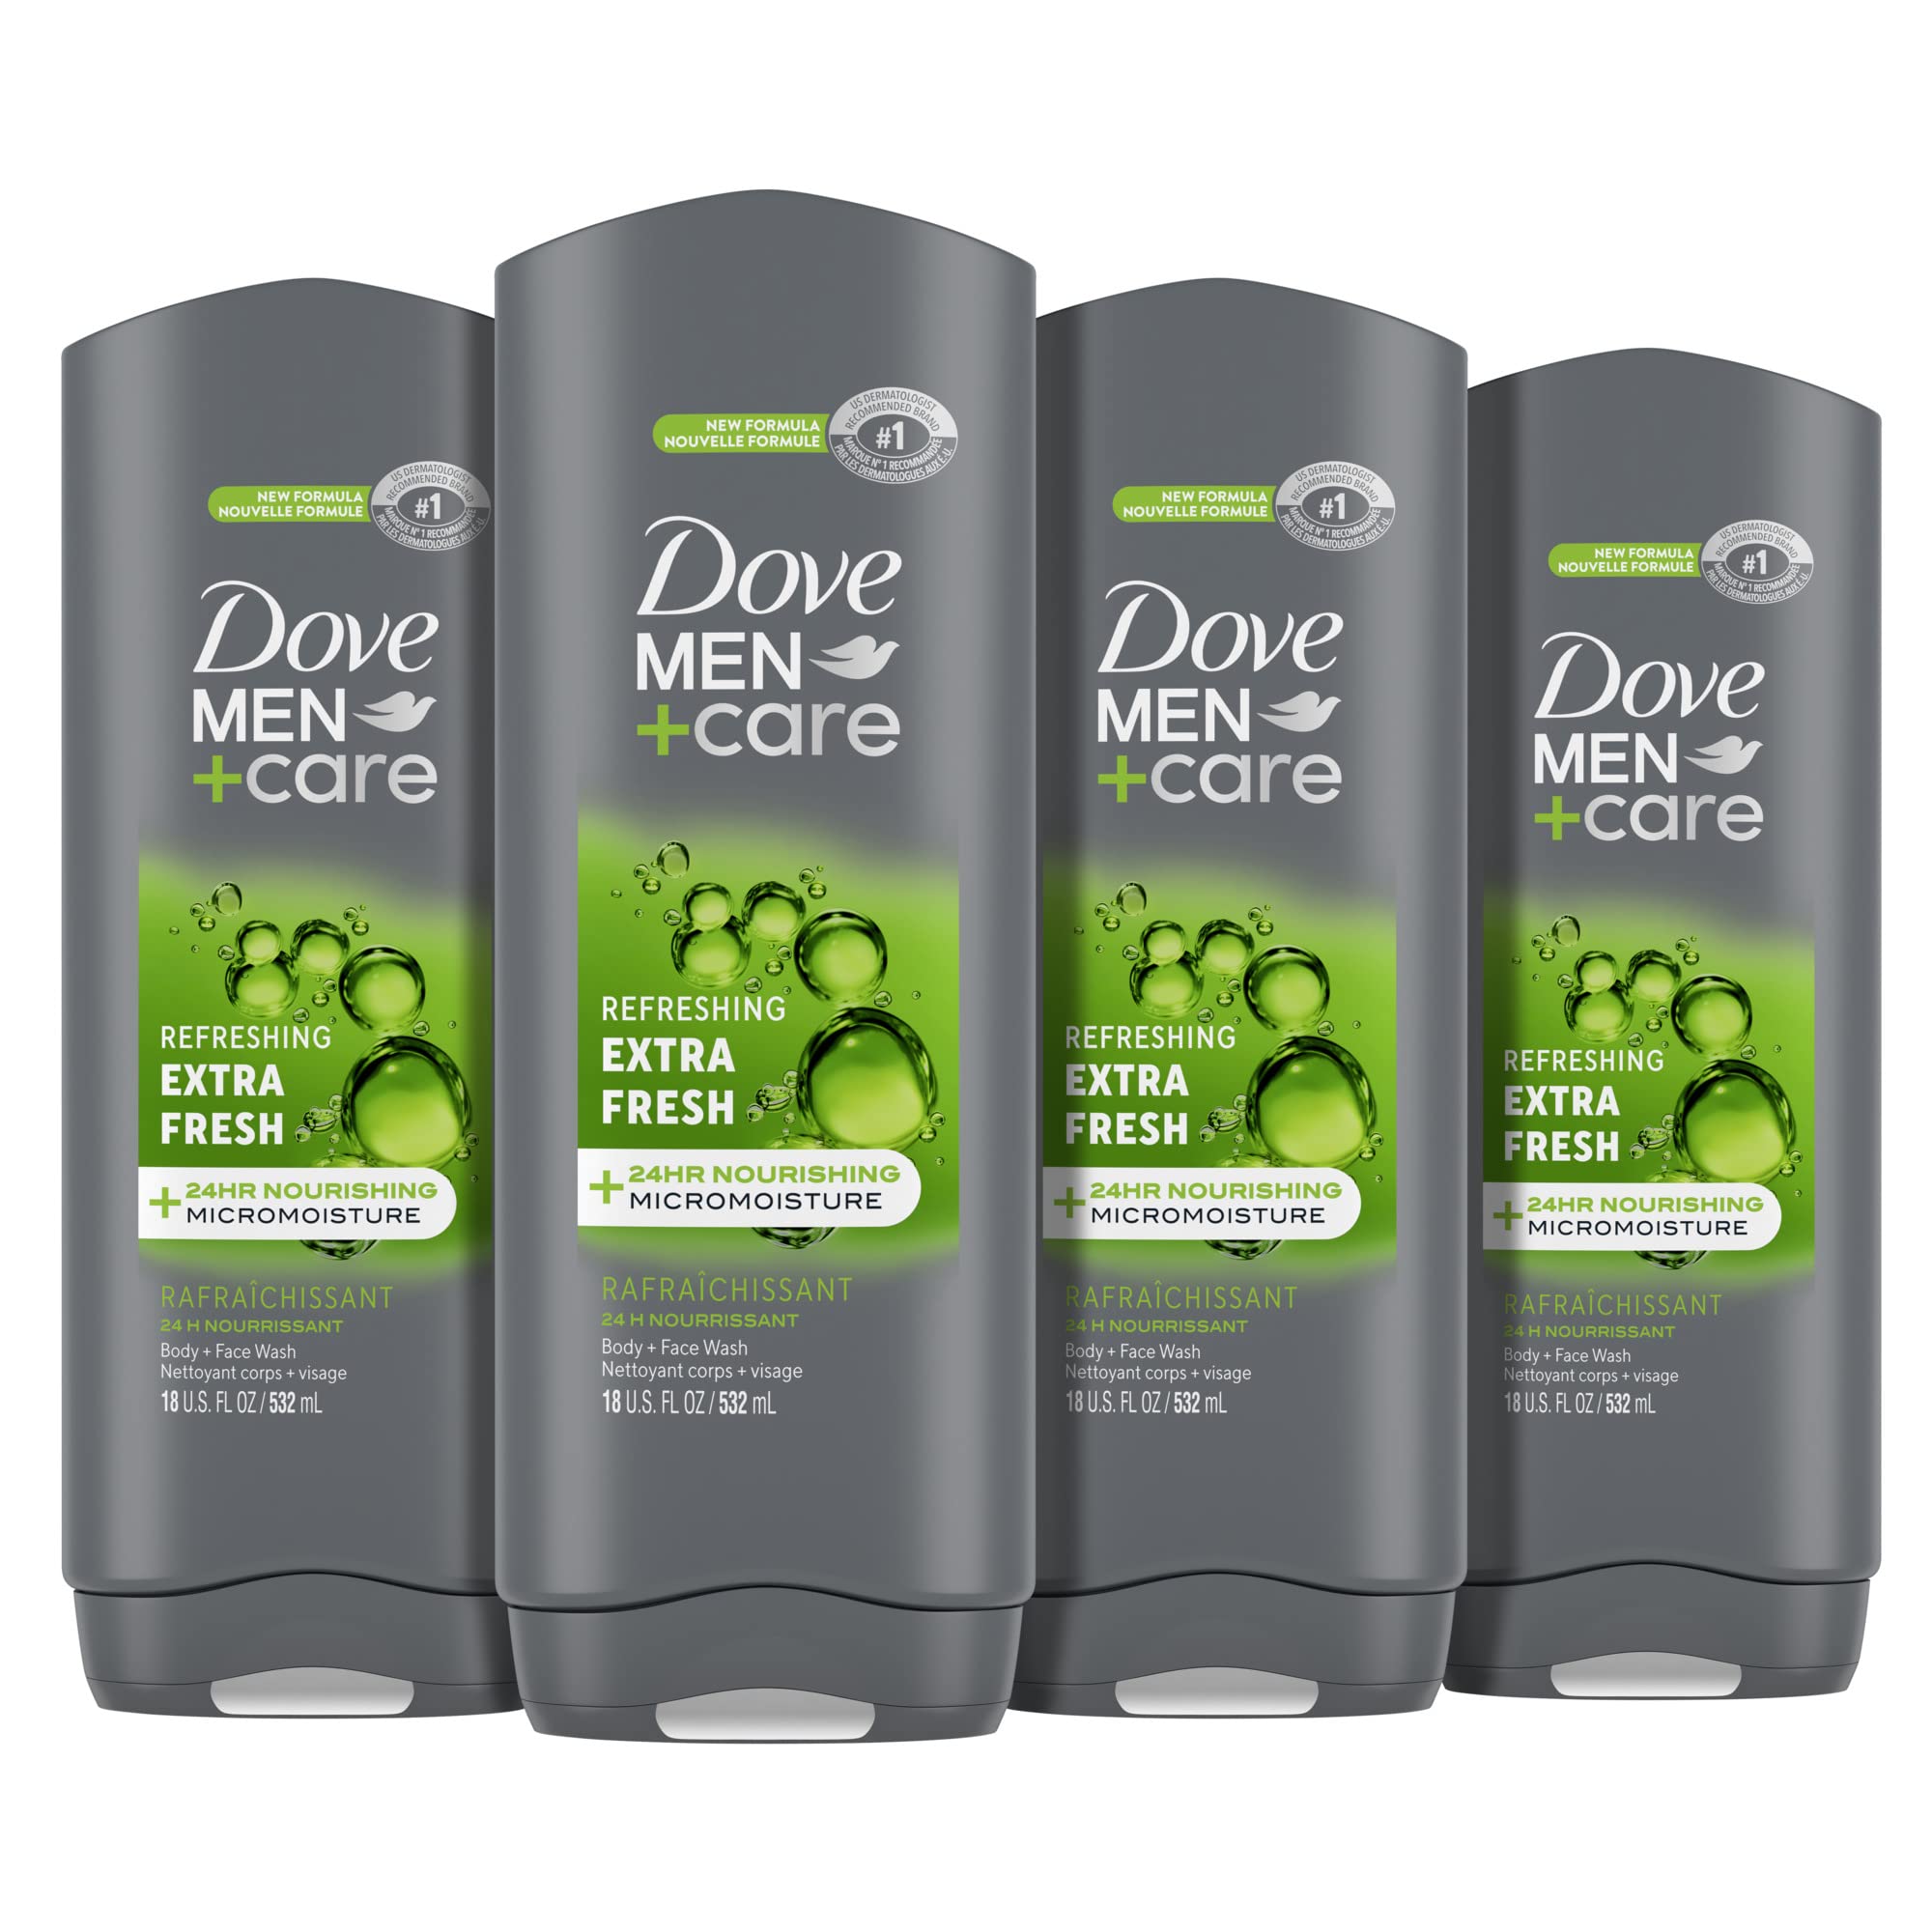 Dove Men+Care Body Wash Extra Fresh for Men's Skin Care Body Wash Effectively Washes Away Bacteria While Nourishing Your Skin, 18 Fl Oz (Pack of 4)